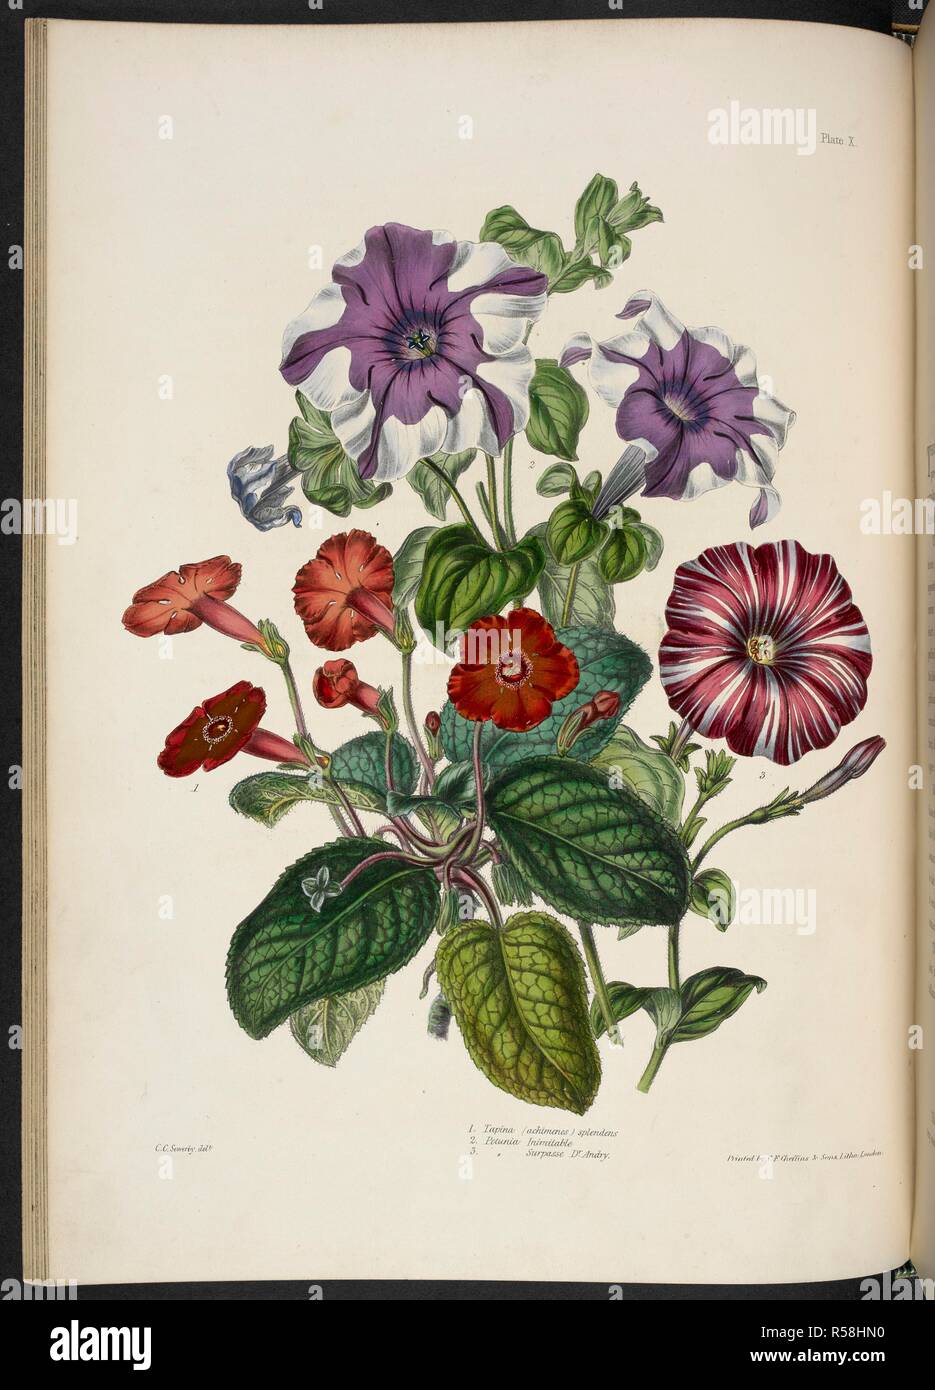 Tapina (Achimenes) splendens / New petunias. 1. tapina (achimenes) splendens; 2. Petunia Inimitable; 3. [Petunia] Surpasse Dr. Andry. . The Illustrated Bouquet, consisting of figures, with descriptions of new flowers. London, 1857-64. Source: 1823.c.13 plate 10. Author: Henderson, Edward George. Sowerby. Stock Photo